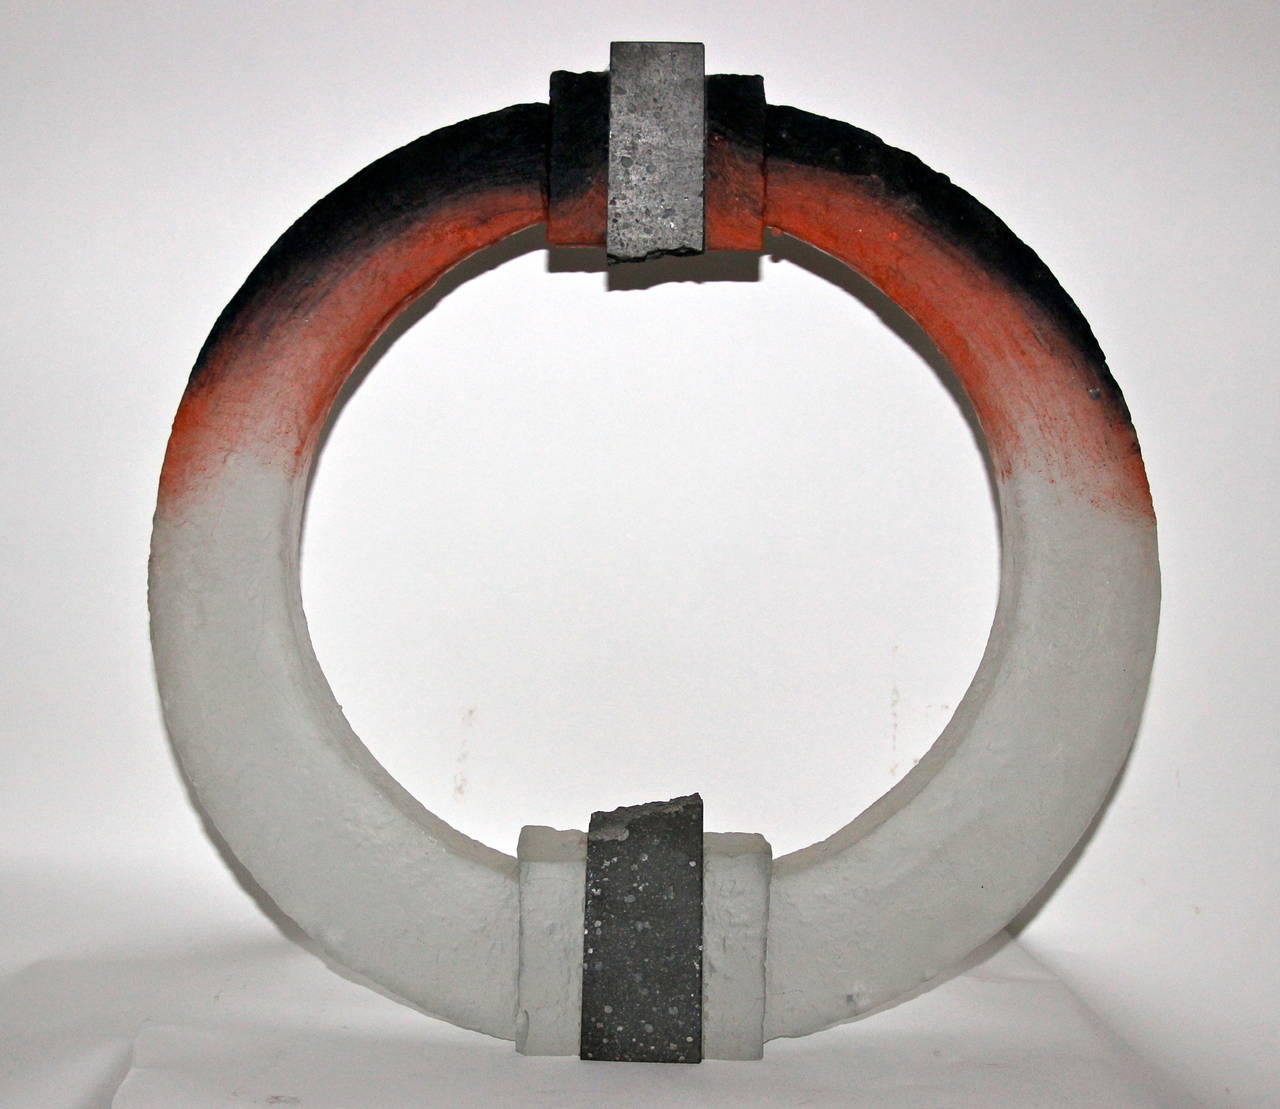 Colin Reid (1953), Sculpture, 
Glass and lava stone, 
Ring shape with decoration in orange and black tones,
circa 1980, England.

Measures: Height: 52 cm, diameter: 51 cm, depth: 9 cm.

Colin Reid has achieved worldwide acclaim for his mastery of